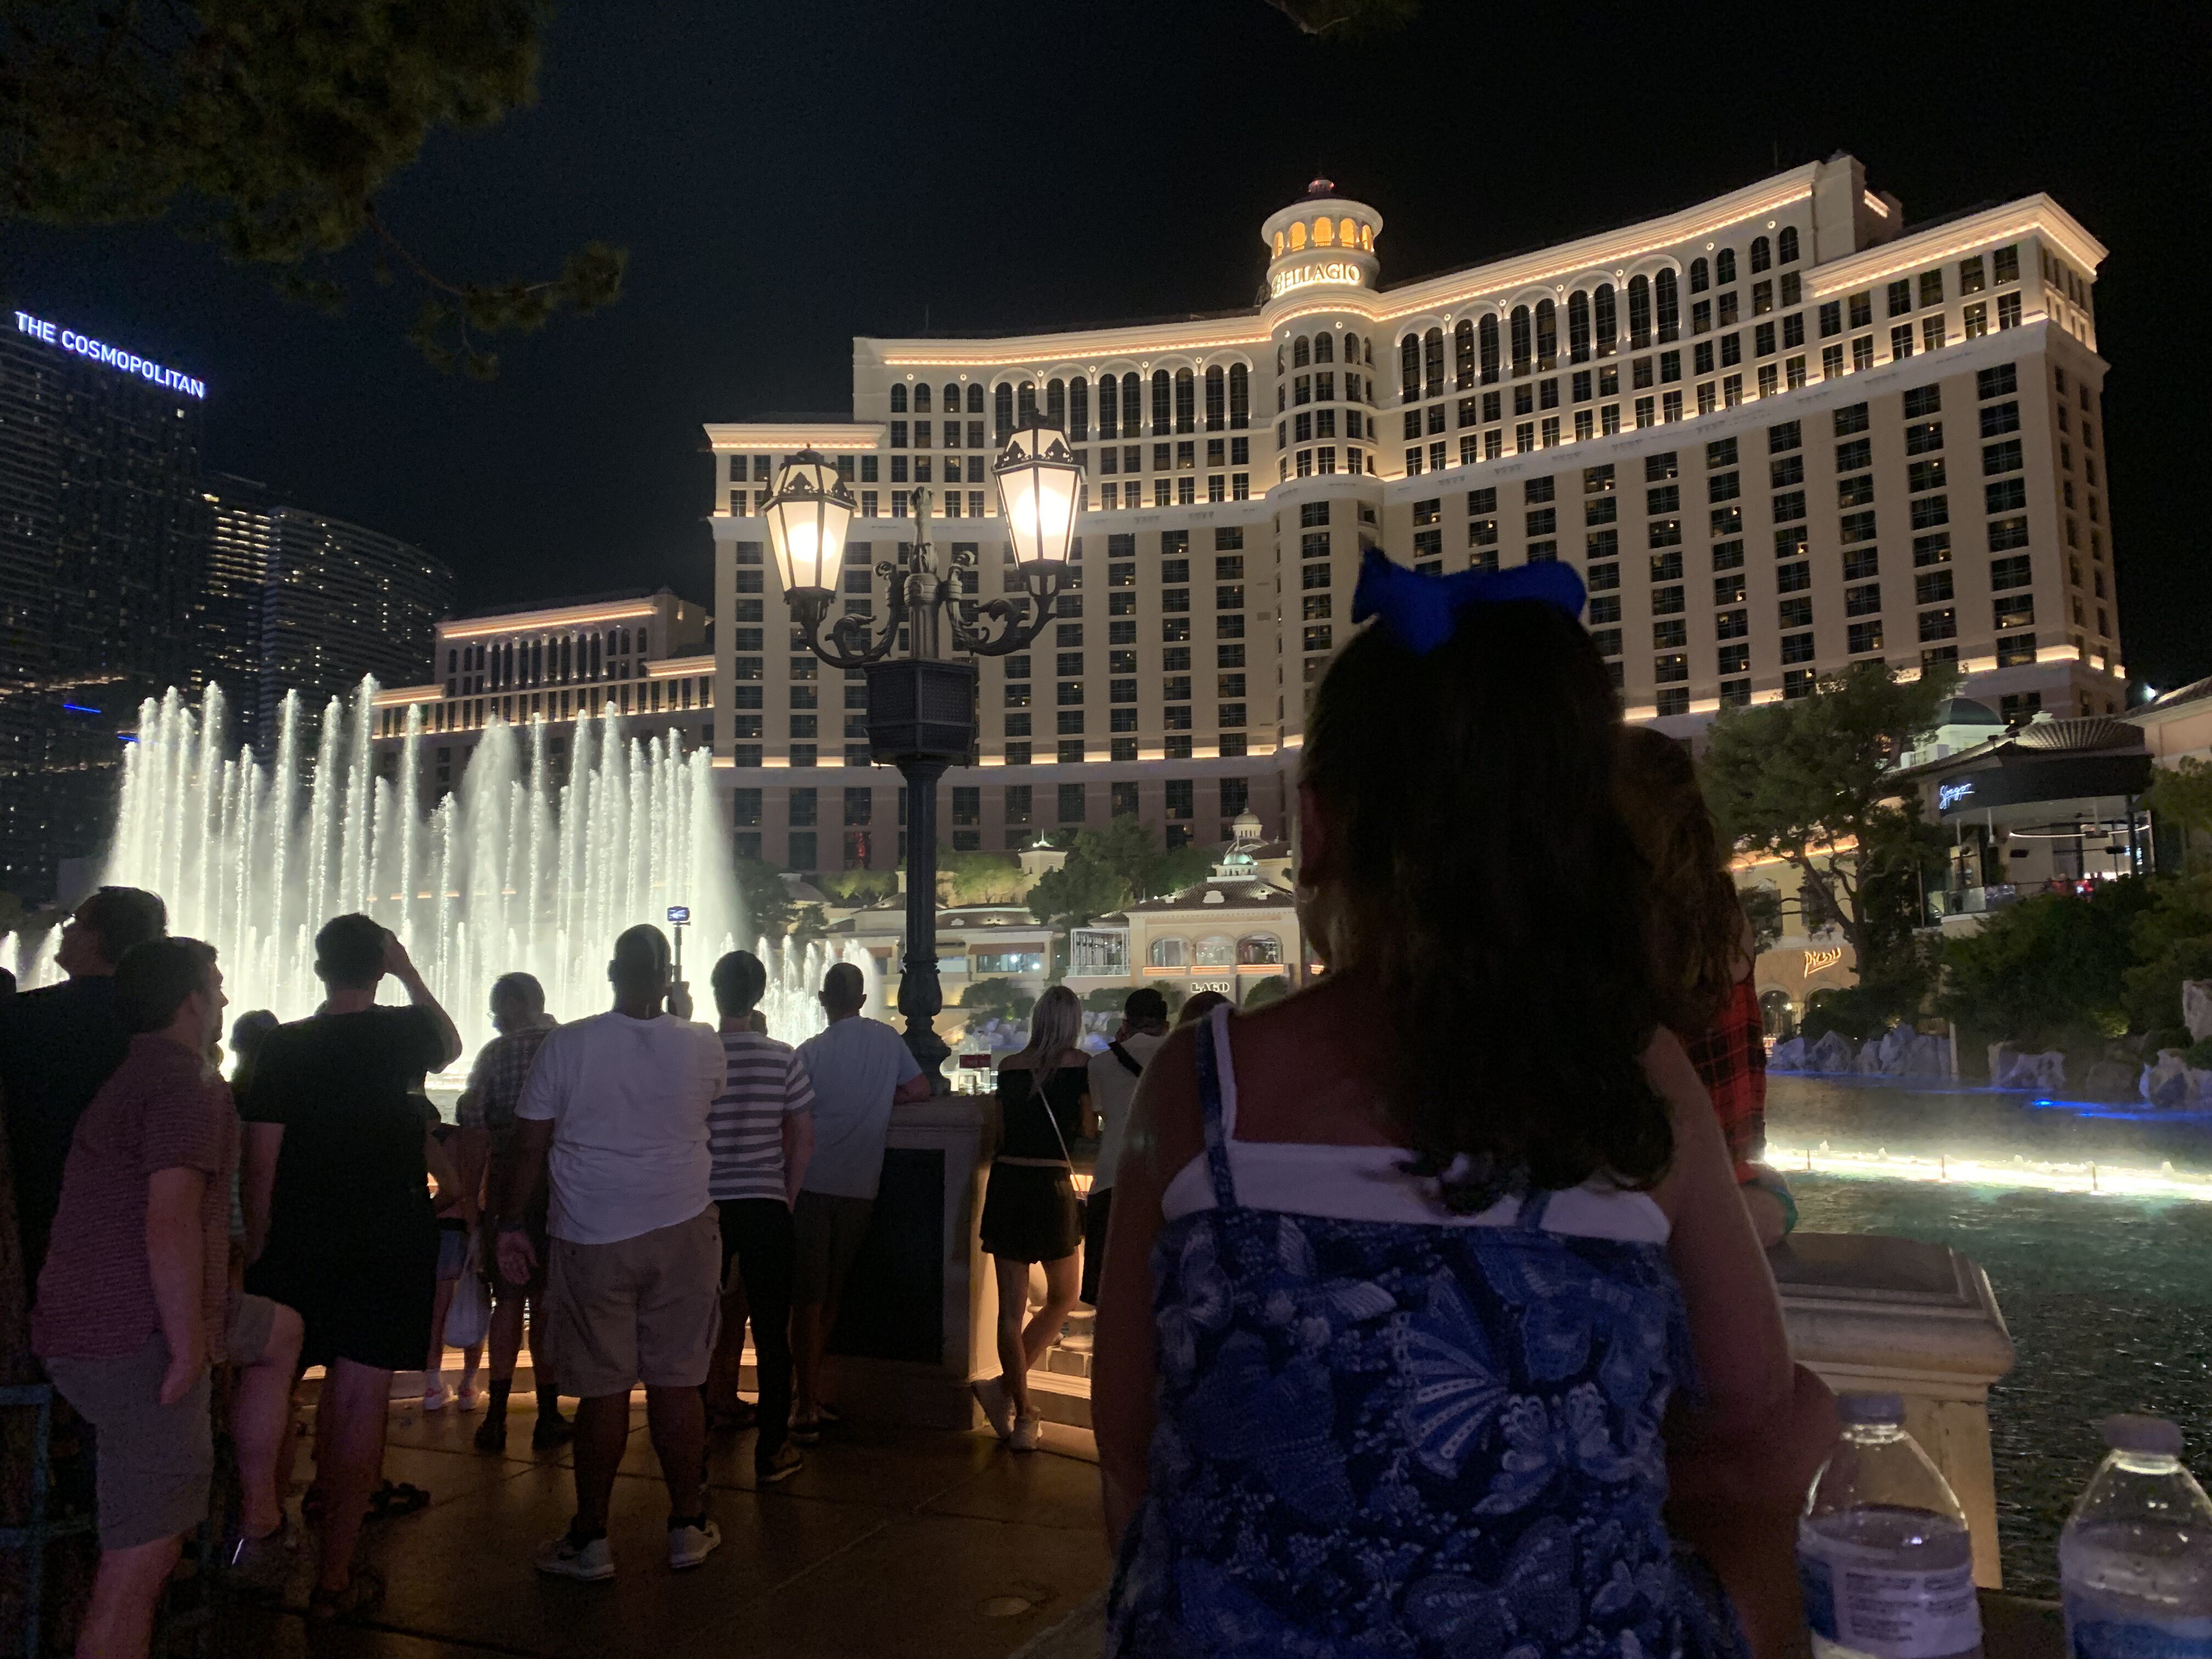 Take the kids to Las Vegas and check out the Bellagio Water Show